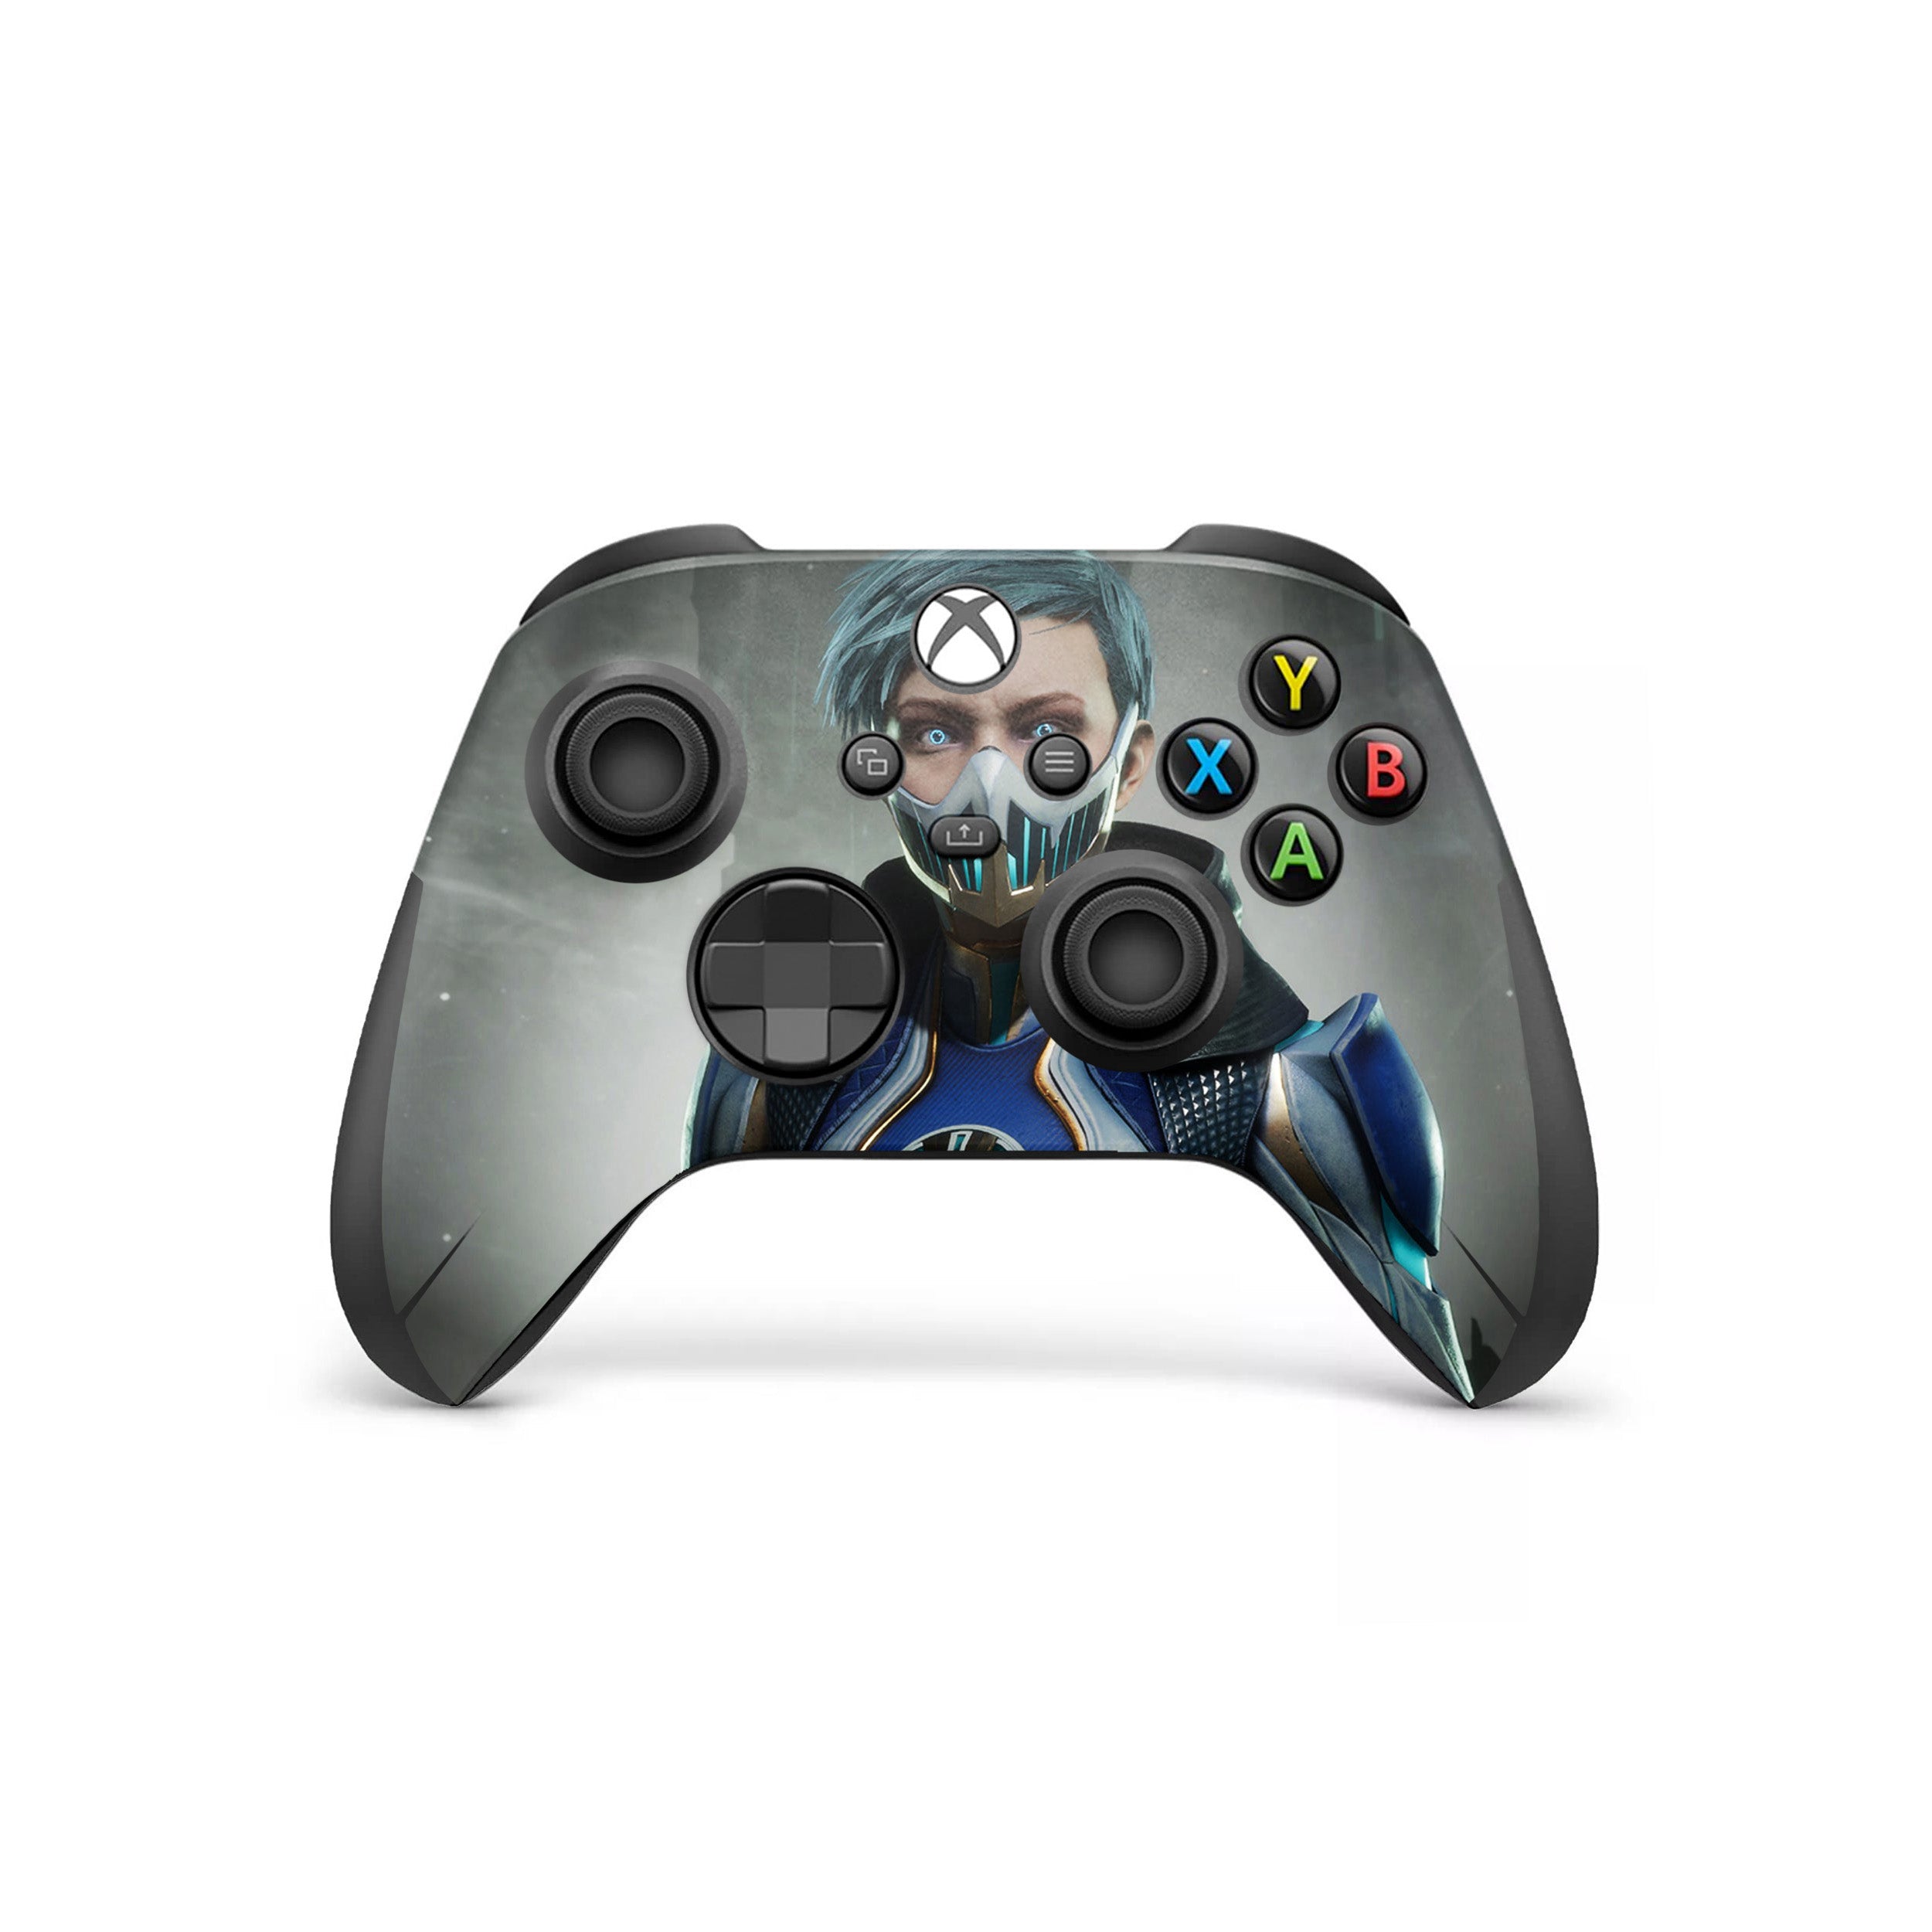 A video game skin featuring a Mortal Kombat 11 design for the Xbox Wireless Controller.